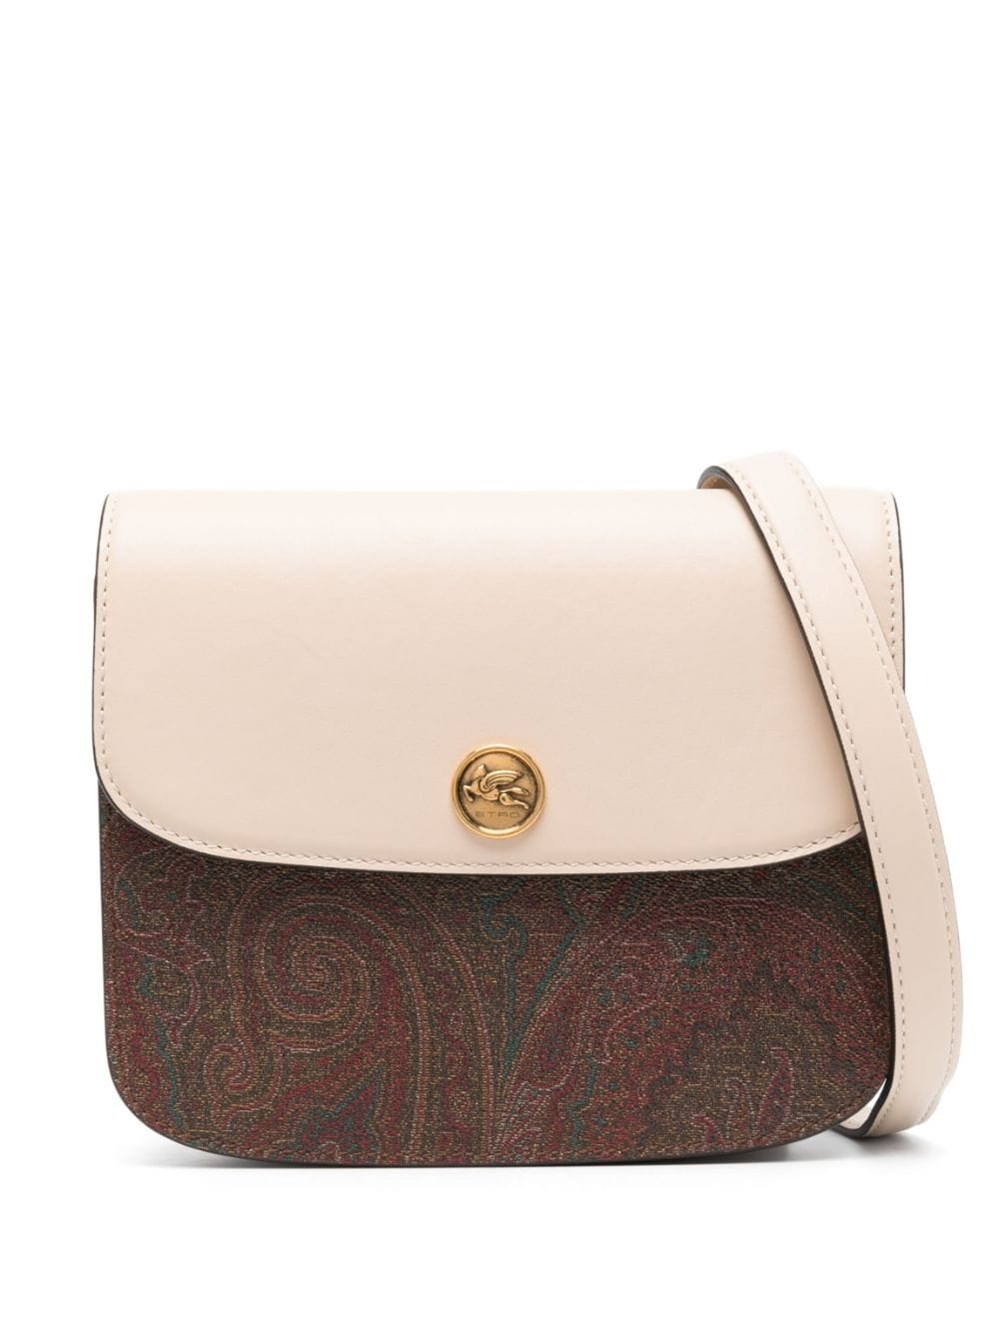 Etro Shoulder Bag With Paisley Print Panels In Nude & Neutrals